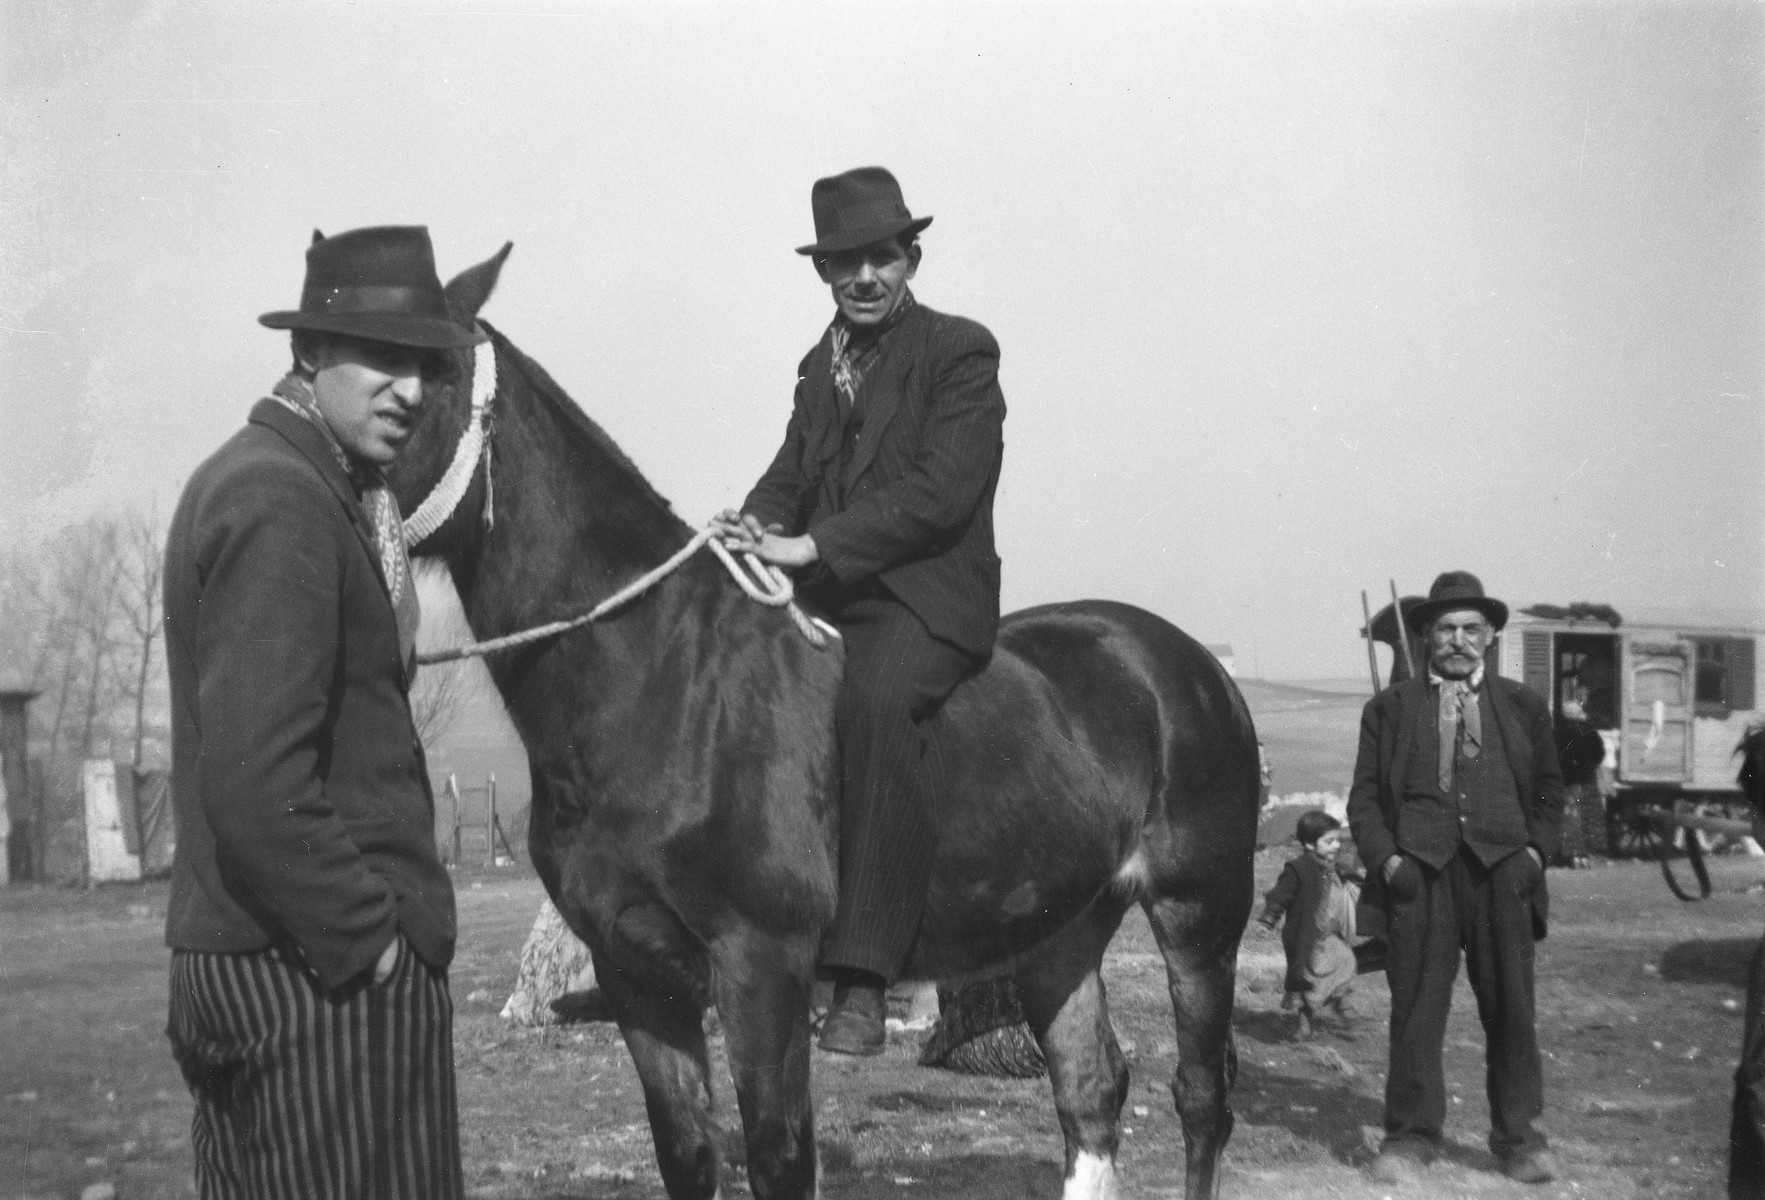 A Romani man sits astride a horse, as others look on.

The caption in "The Heroic Present" reads, "Europe, 1930s."